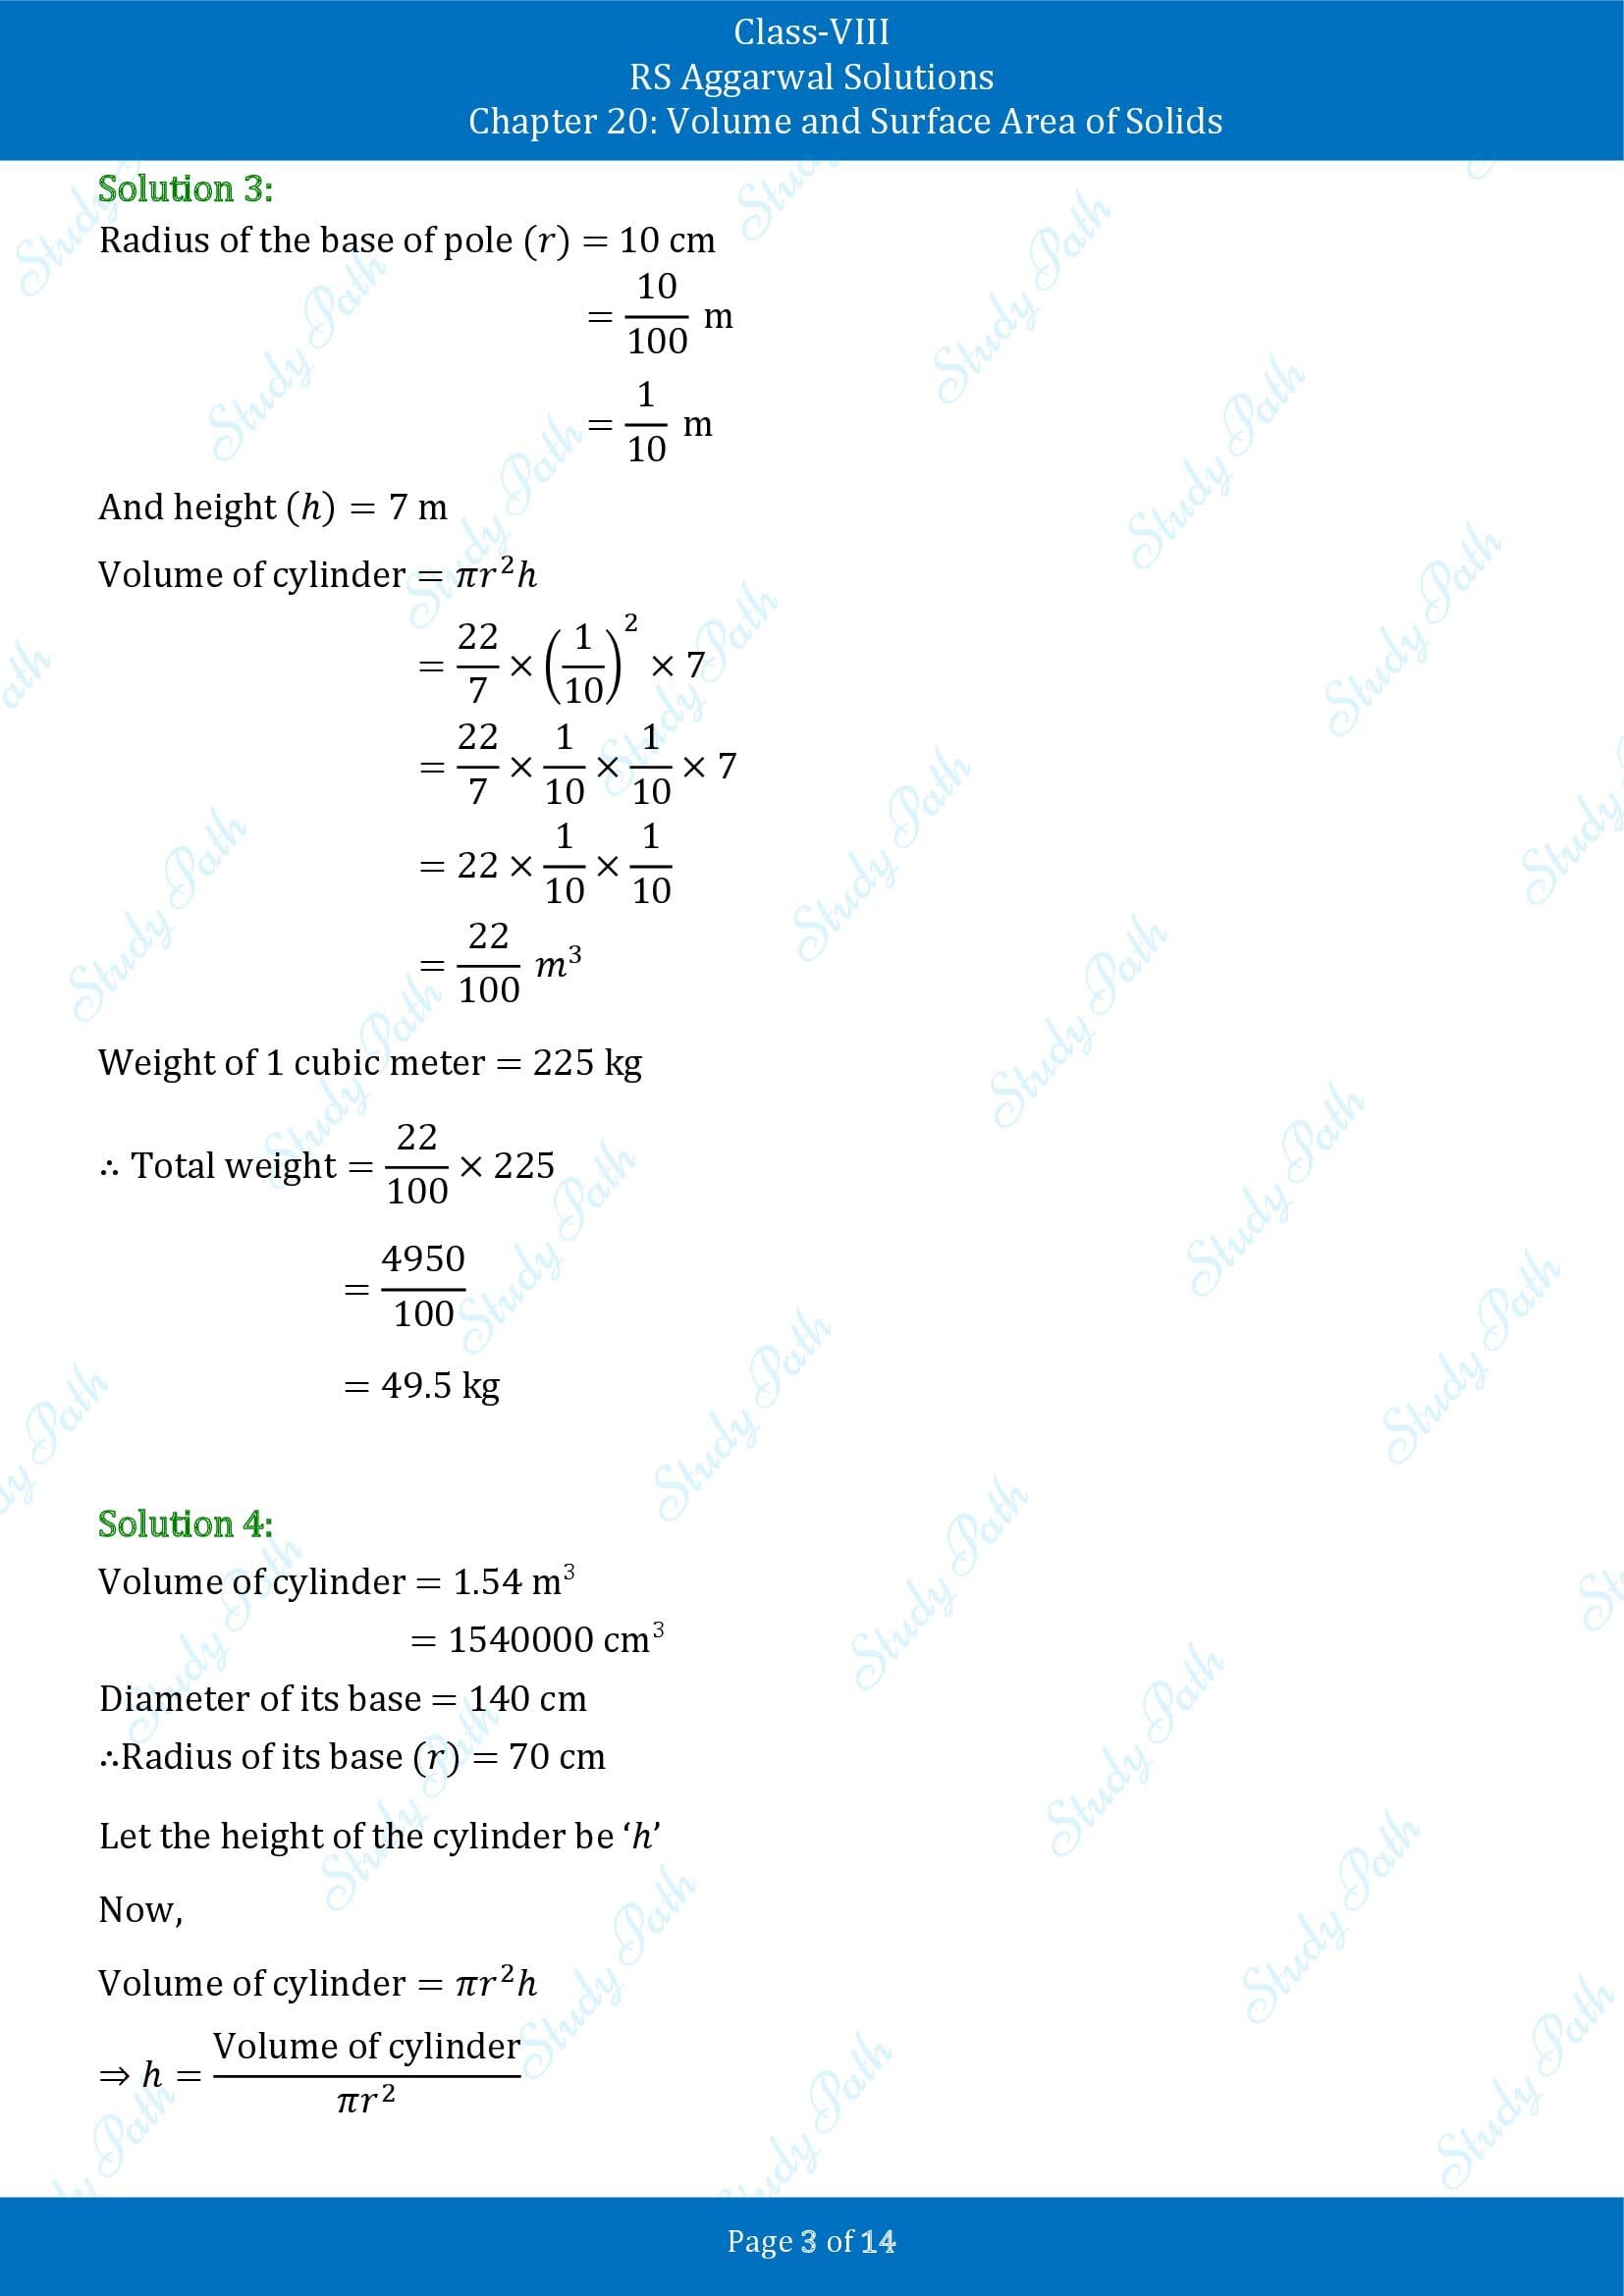 RS Aggarwal Solutions Class 8 Chapter 20 Volume and Surface Area of Solids Exercise 20B 00003